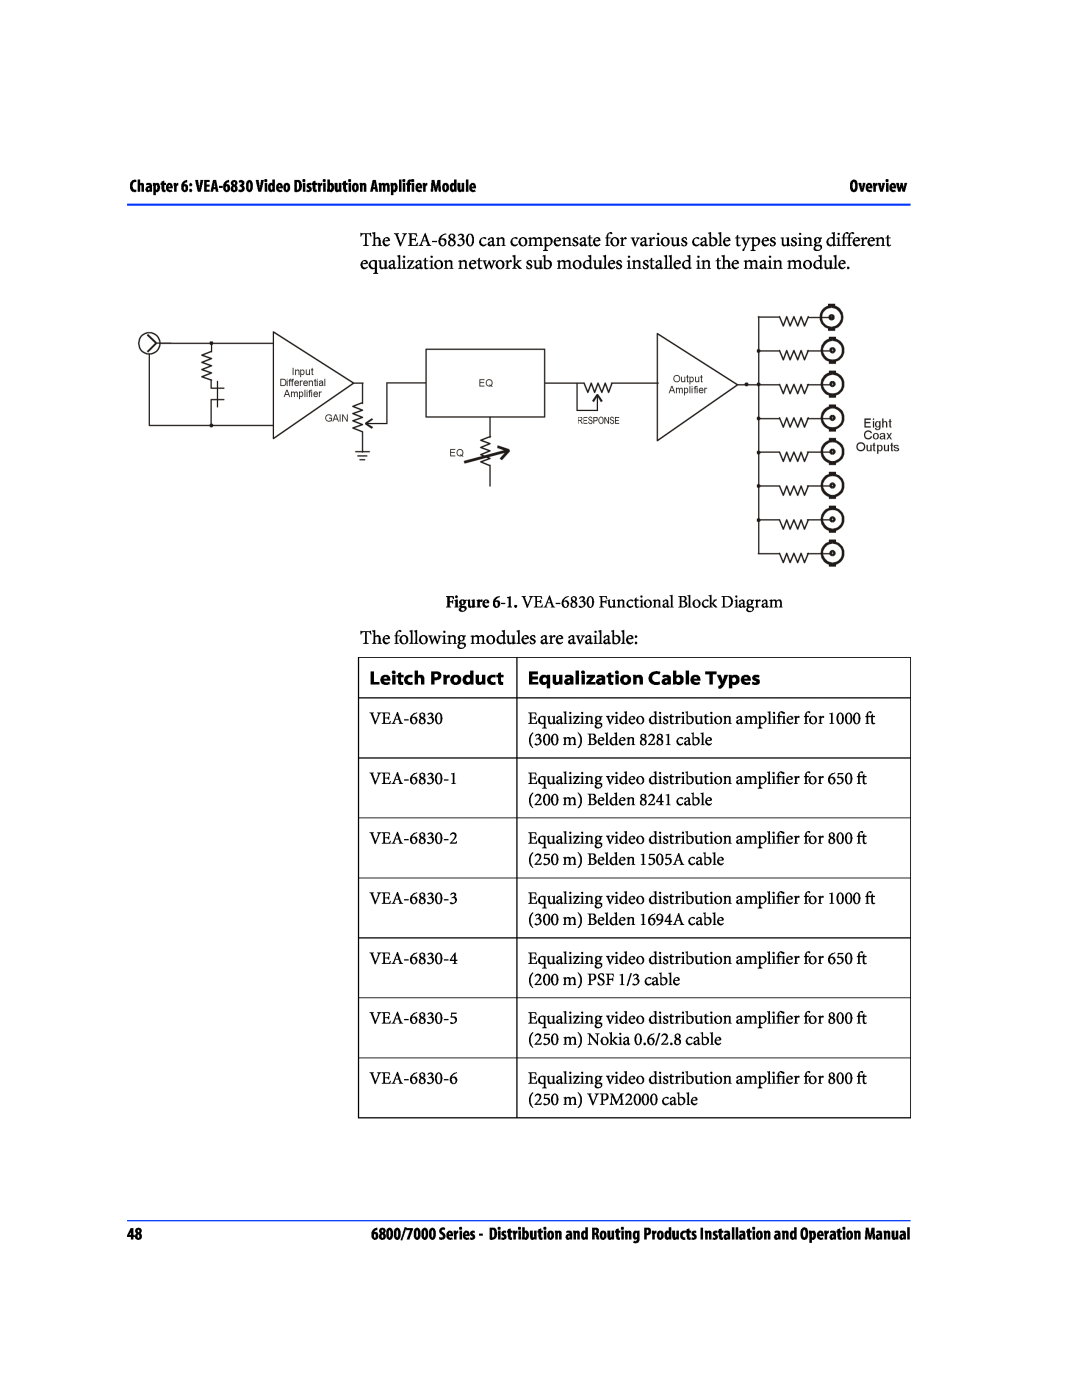 Nokia 7000 Series, 6800 Series Leitch Product, Equalization Cable Types, The following modules are available 